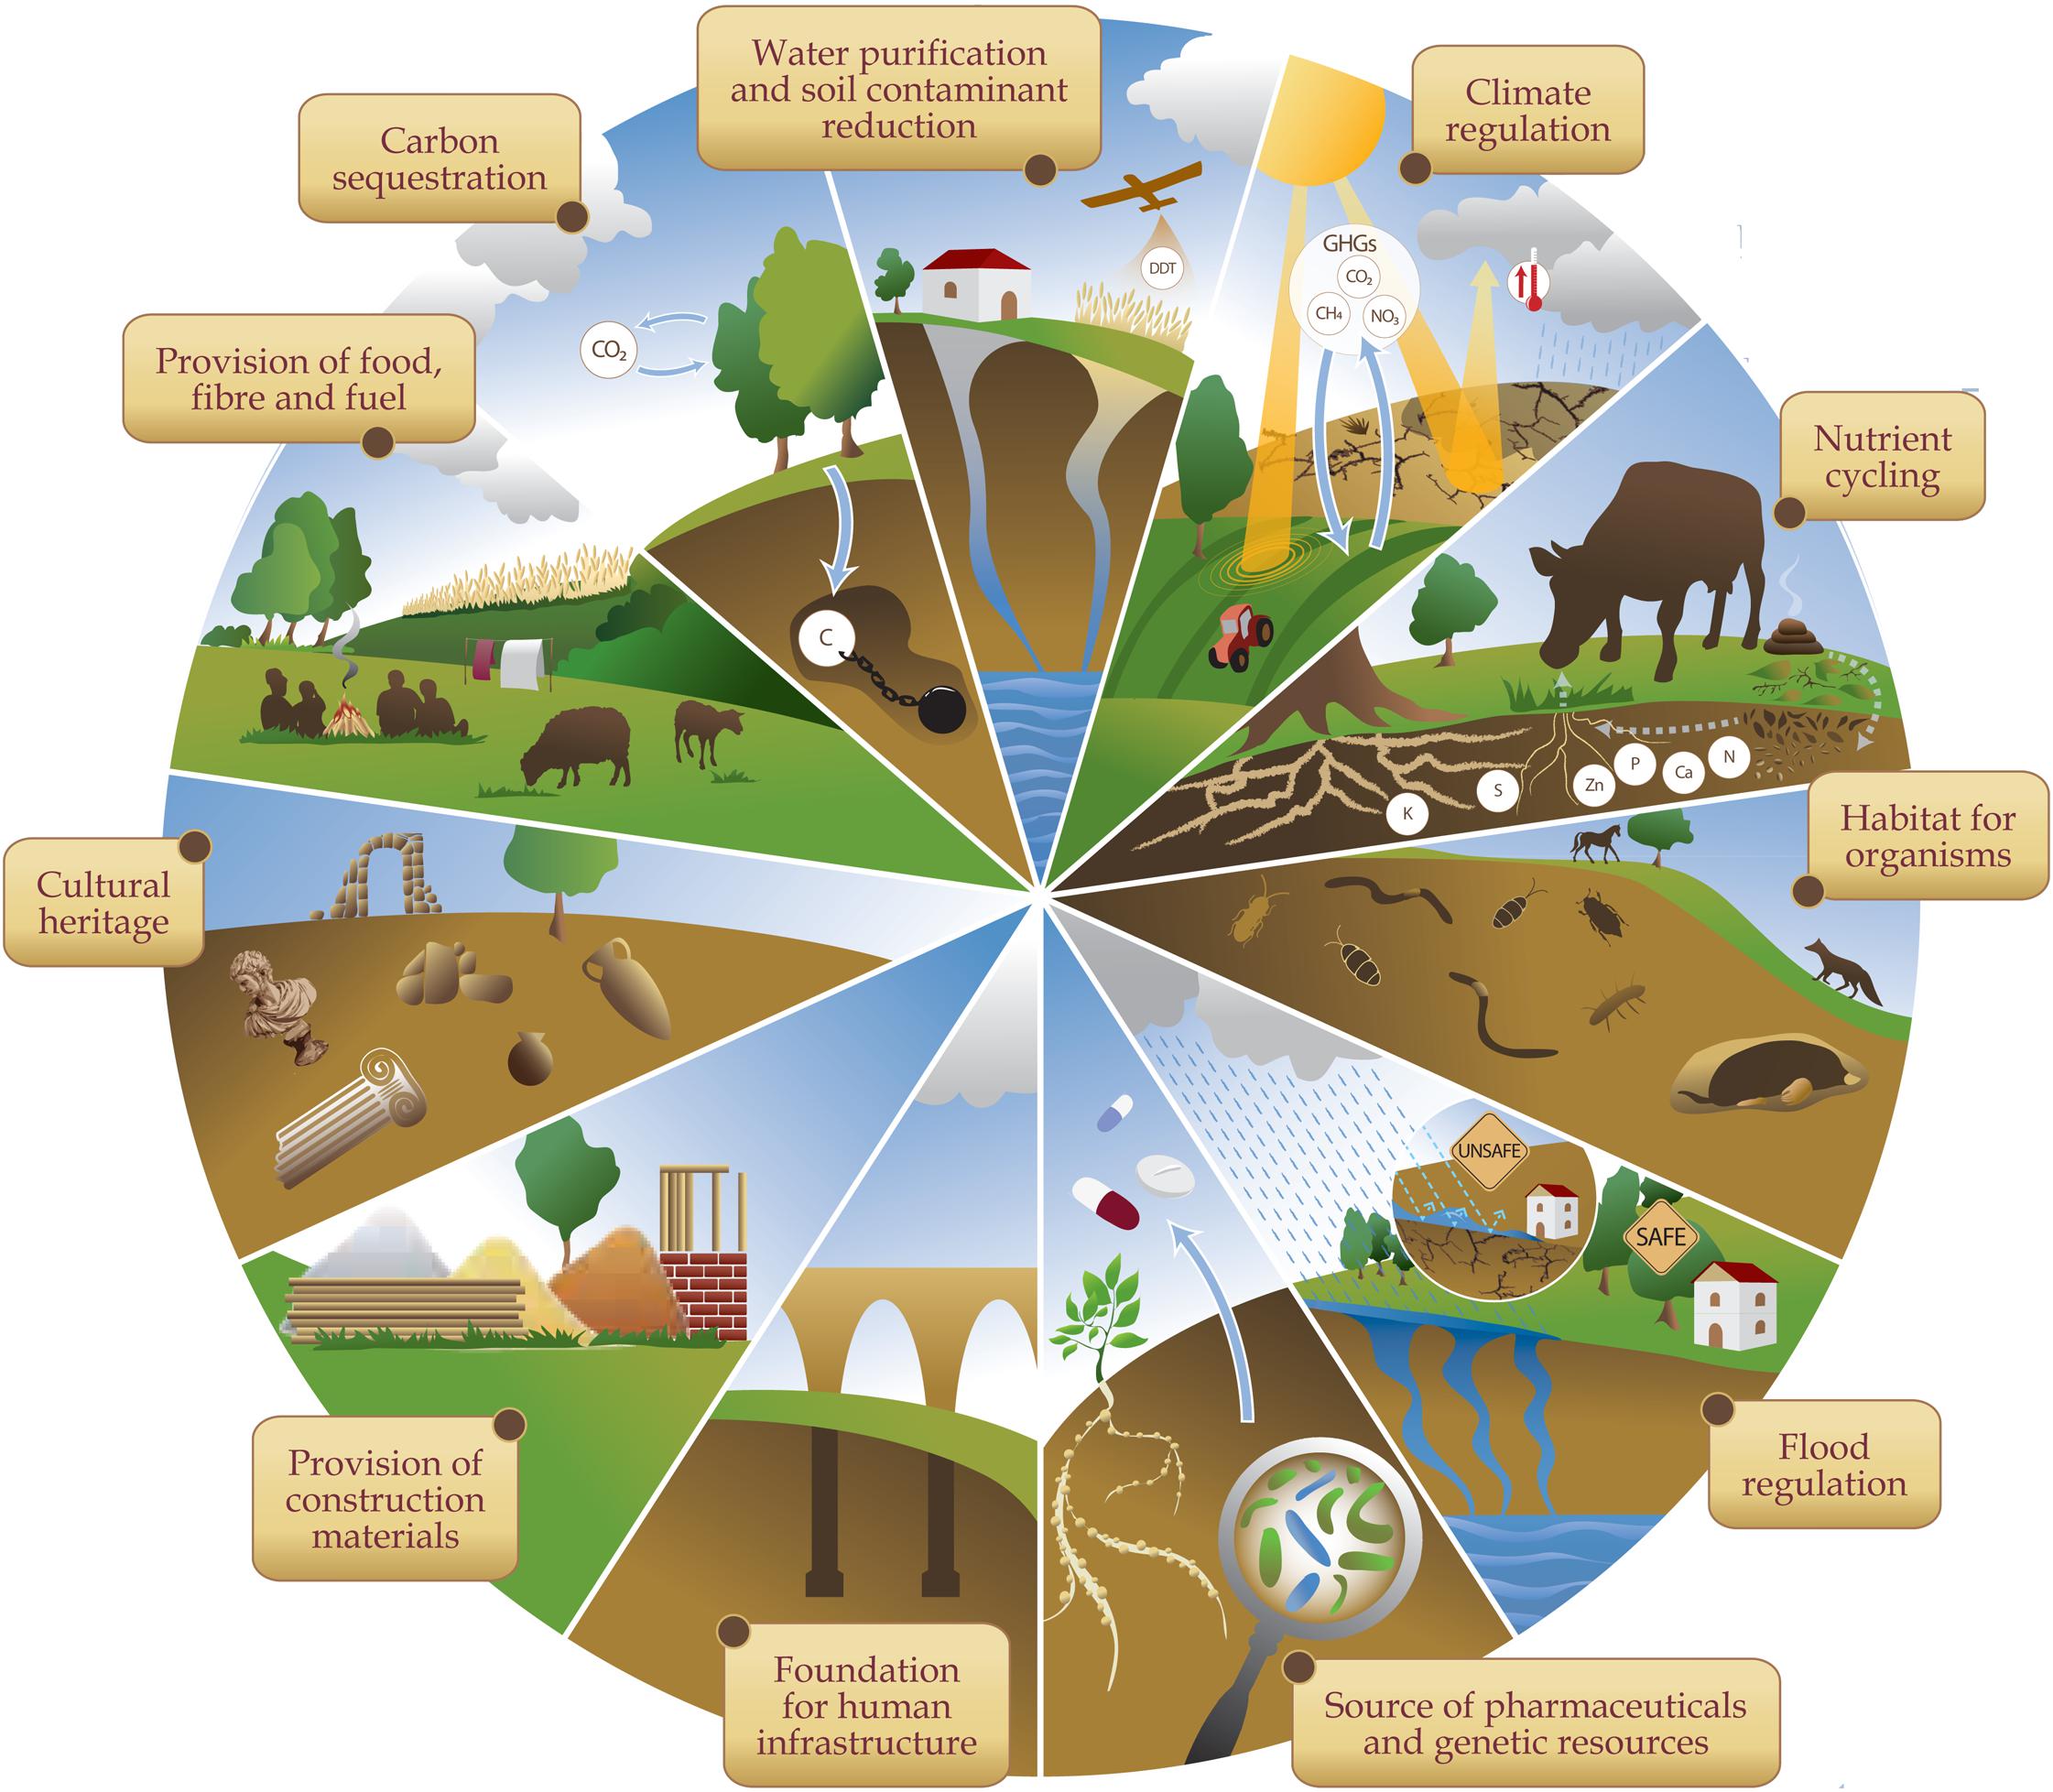 frontiers-soil-organic-matter-research-and-climate-change-merely-re